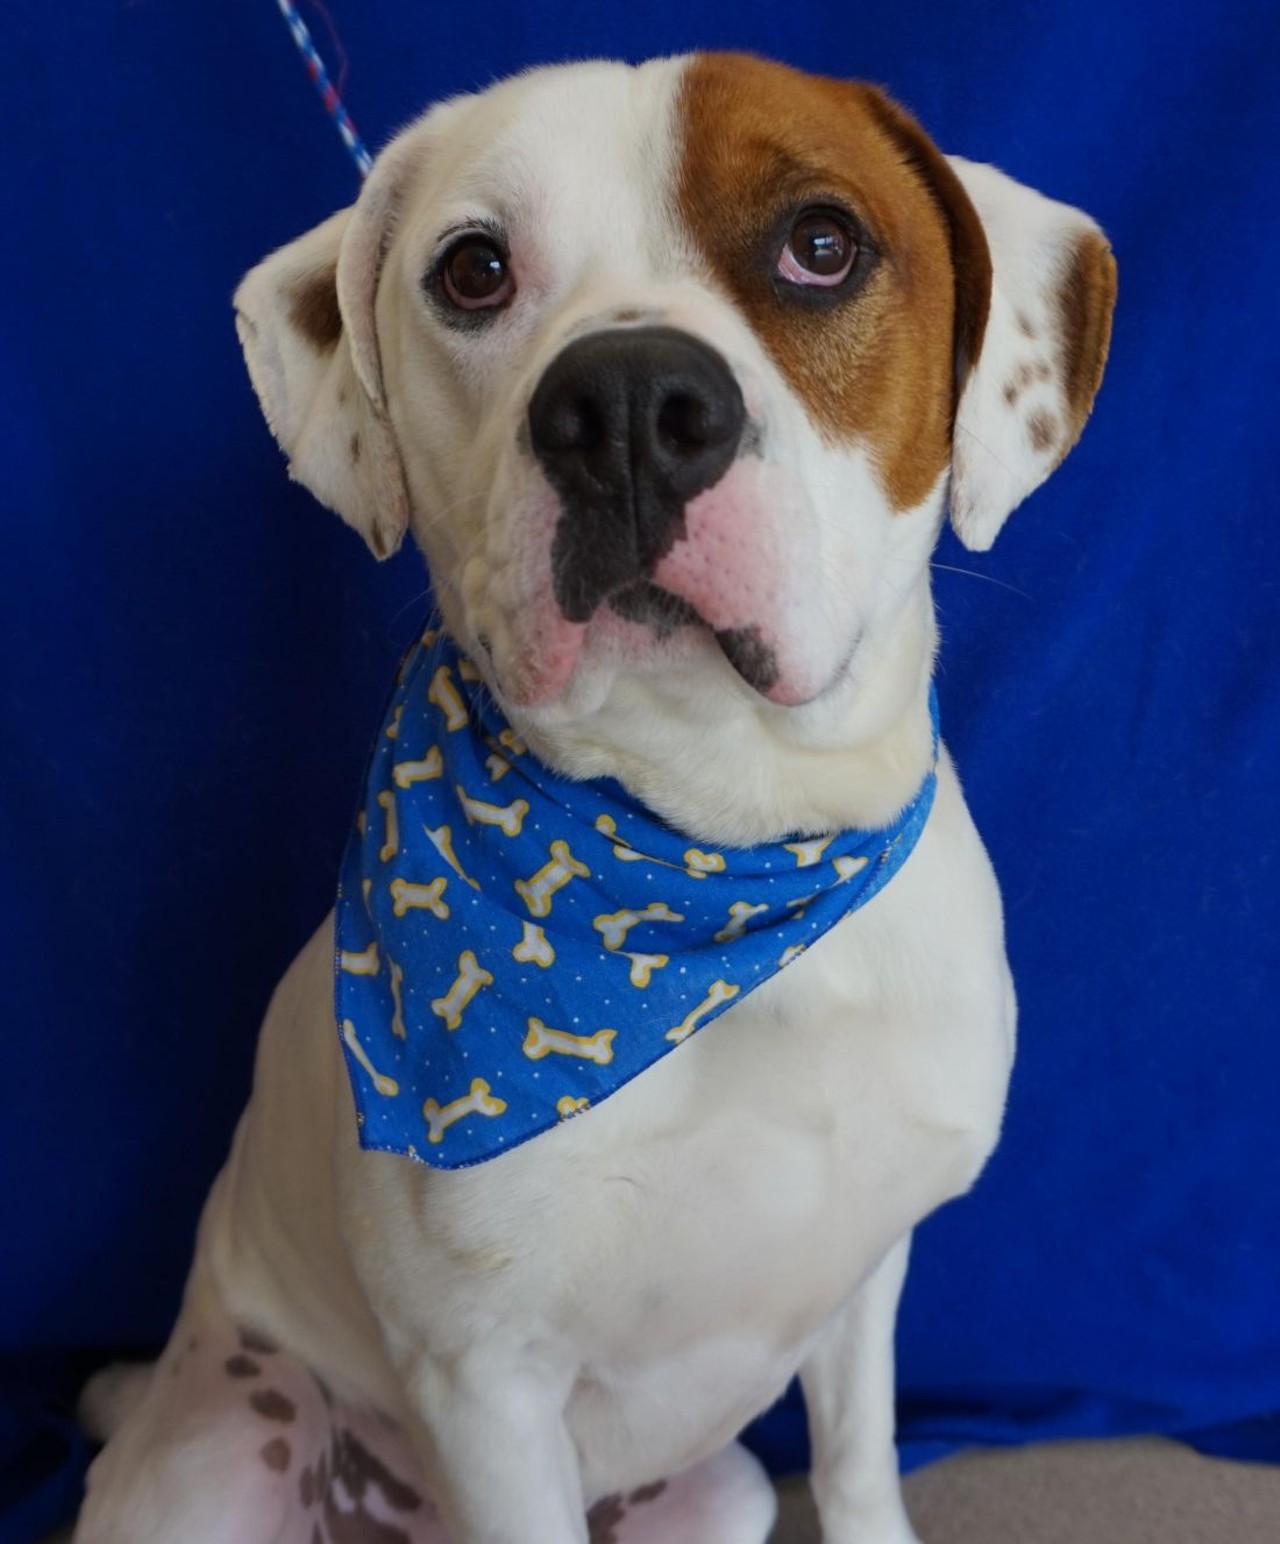 NAME: Big Bry
GENDER: Male 
BREED: American Bulldog 
AGE: 5 years 
WEIGHT: 70 pounds
SPECIAL CONSIDERATIONS: May prefer to be your only pet 
REASON I CAME TO MHS: Agency transfer 
LOCATION: Mackey Center for Animal Care in Detroit 
ID NUMBER: 866793 